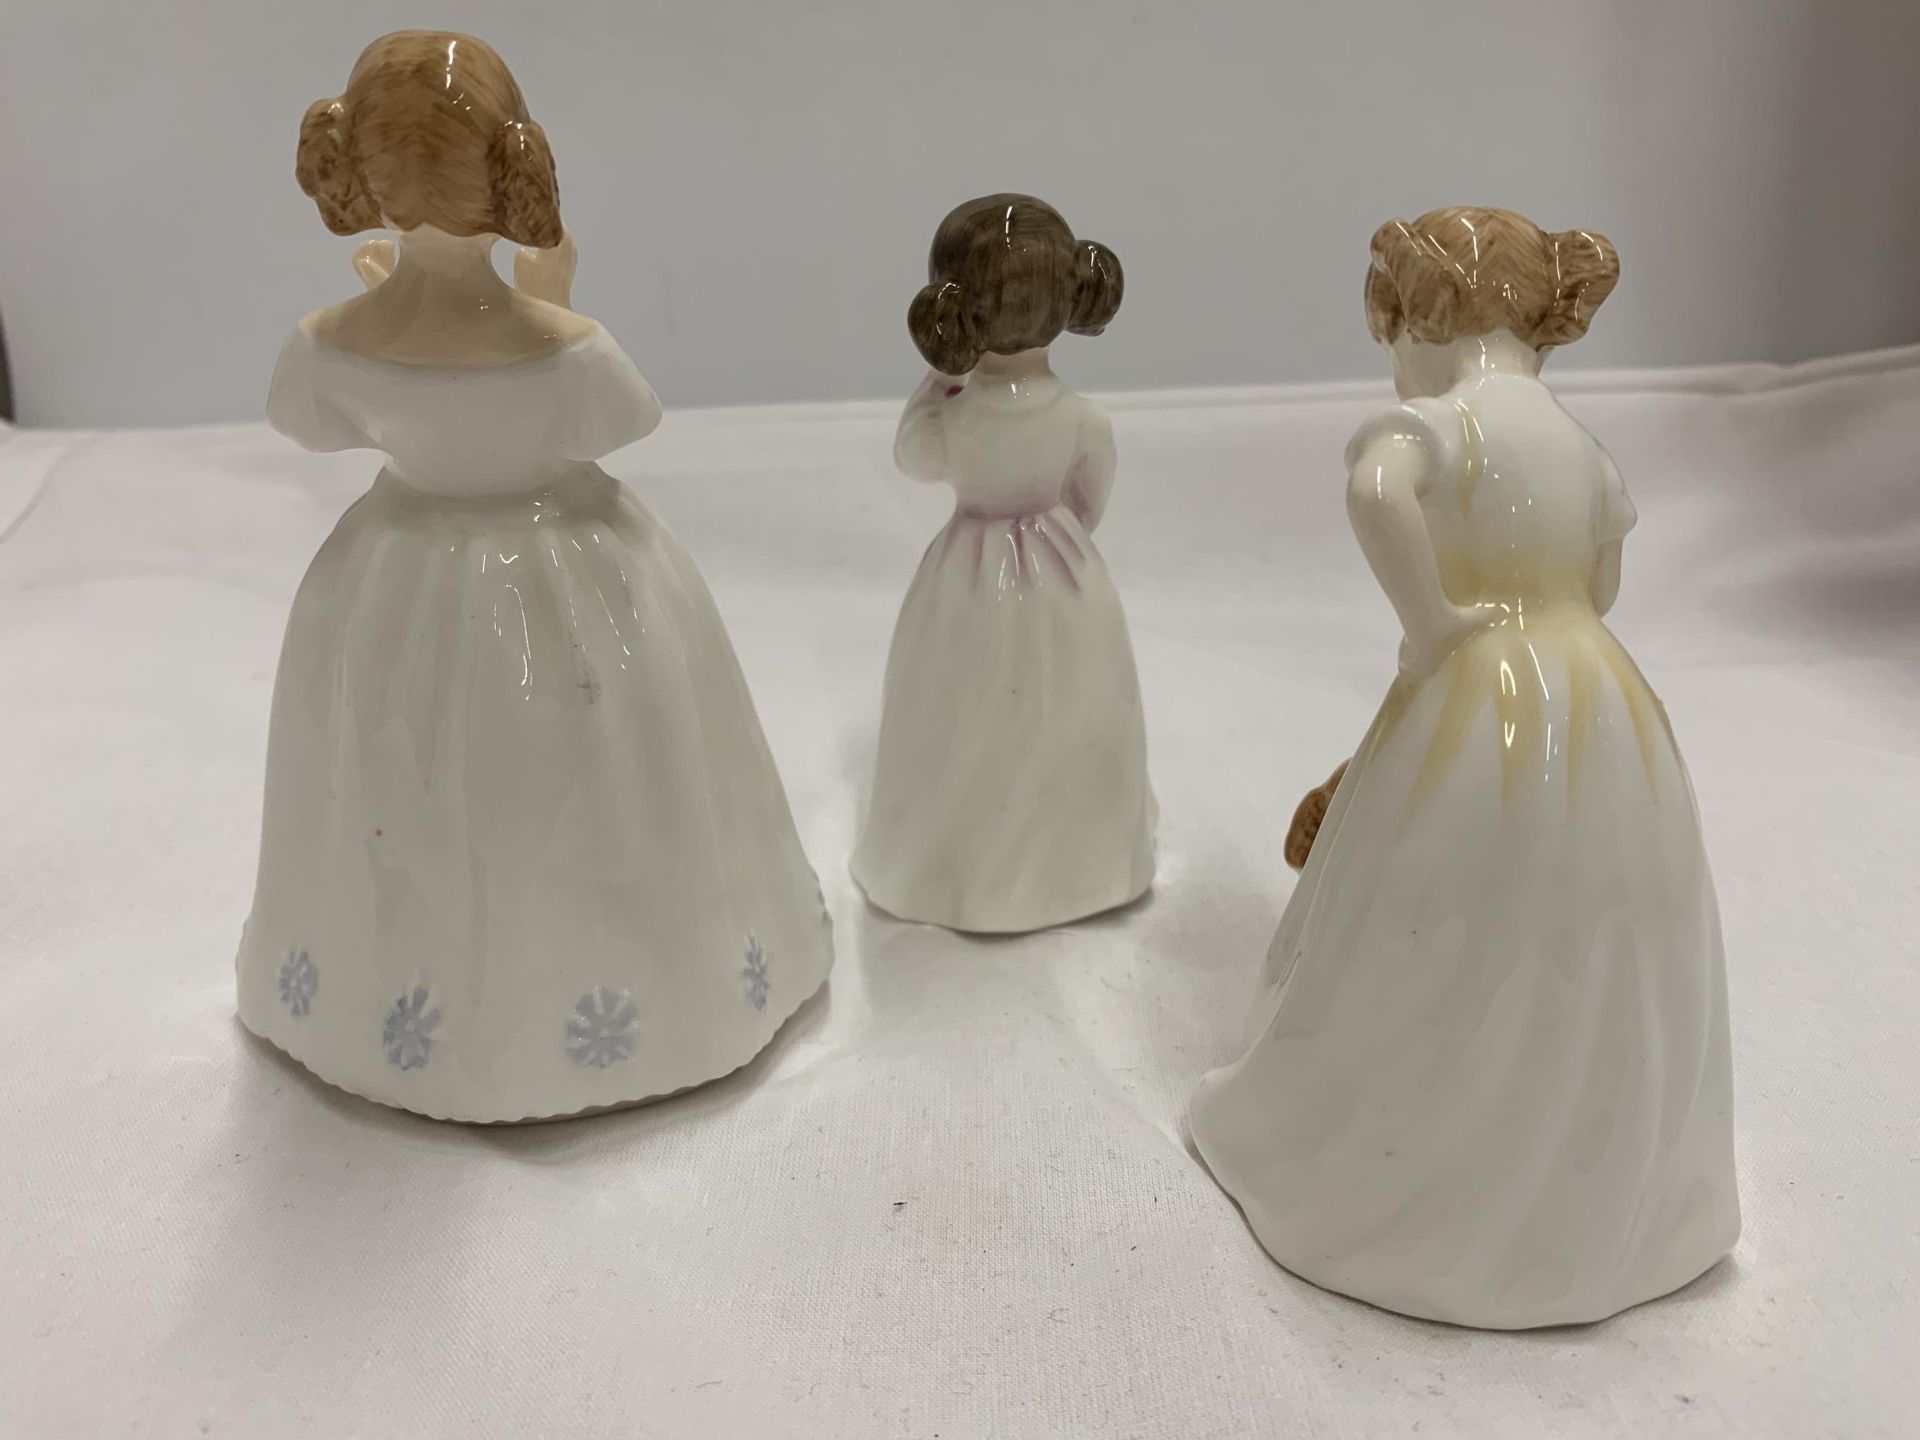 THREE ROYAL DOULTON FIGURES - 'CATHERINE' HN3044, 'DADDY'S GIRL' HN3435 AND HN3123 (ALL SECONDS) - Image 3 of 5